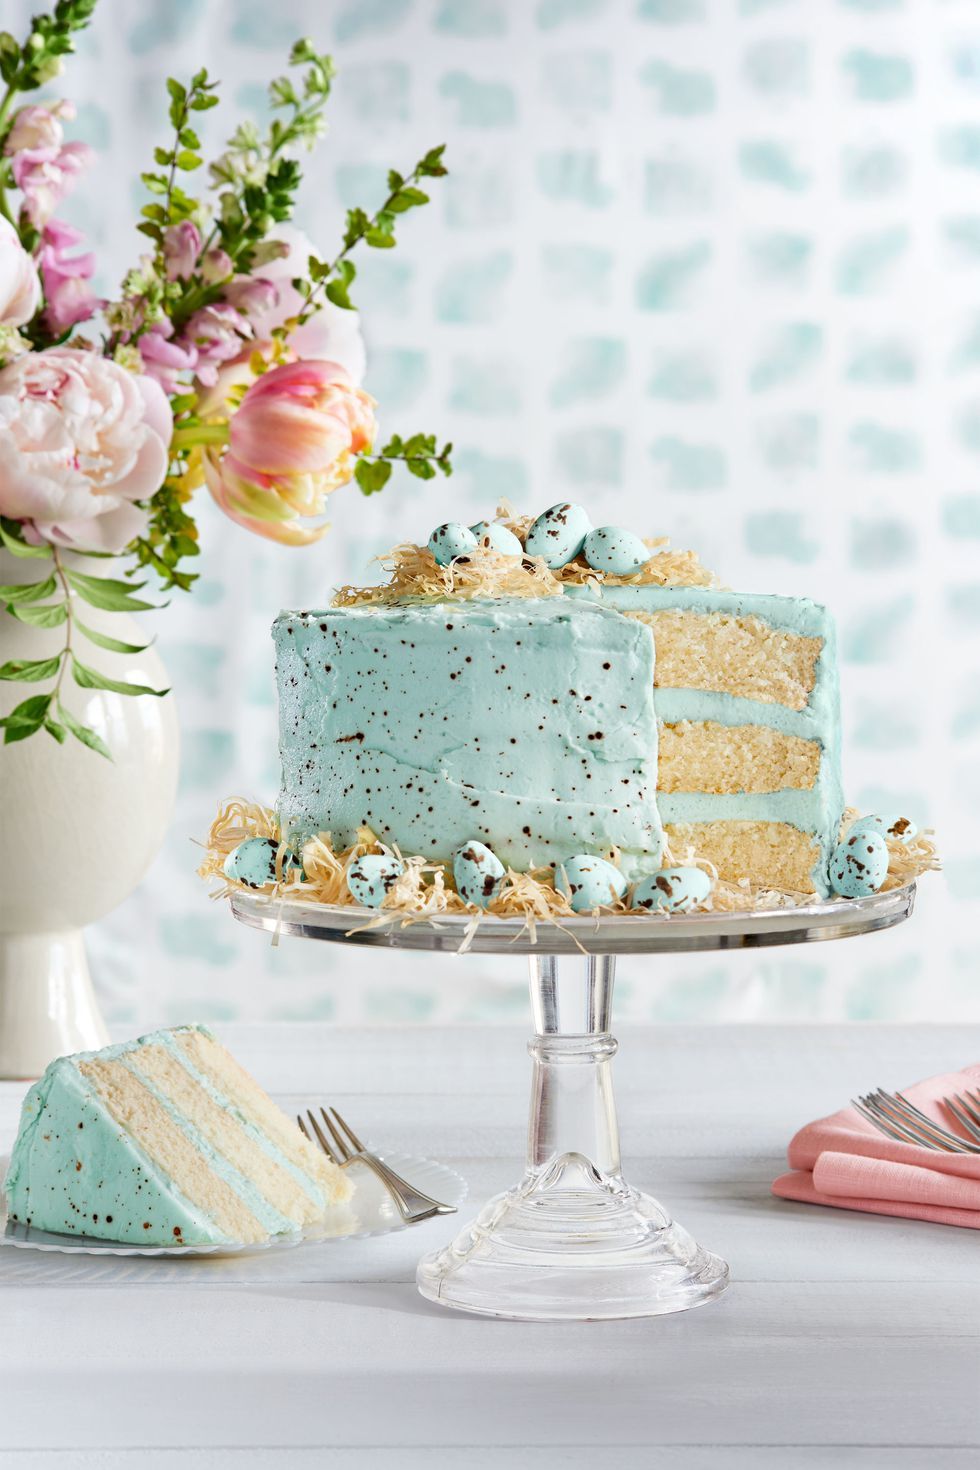 50 Adorable Baby Shower Cake Ideas